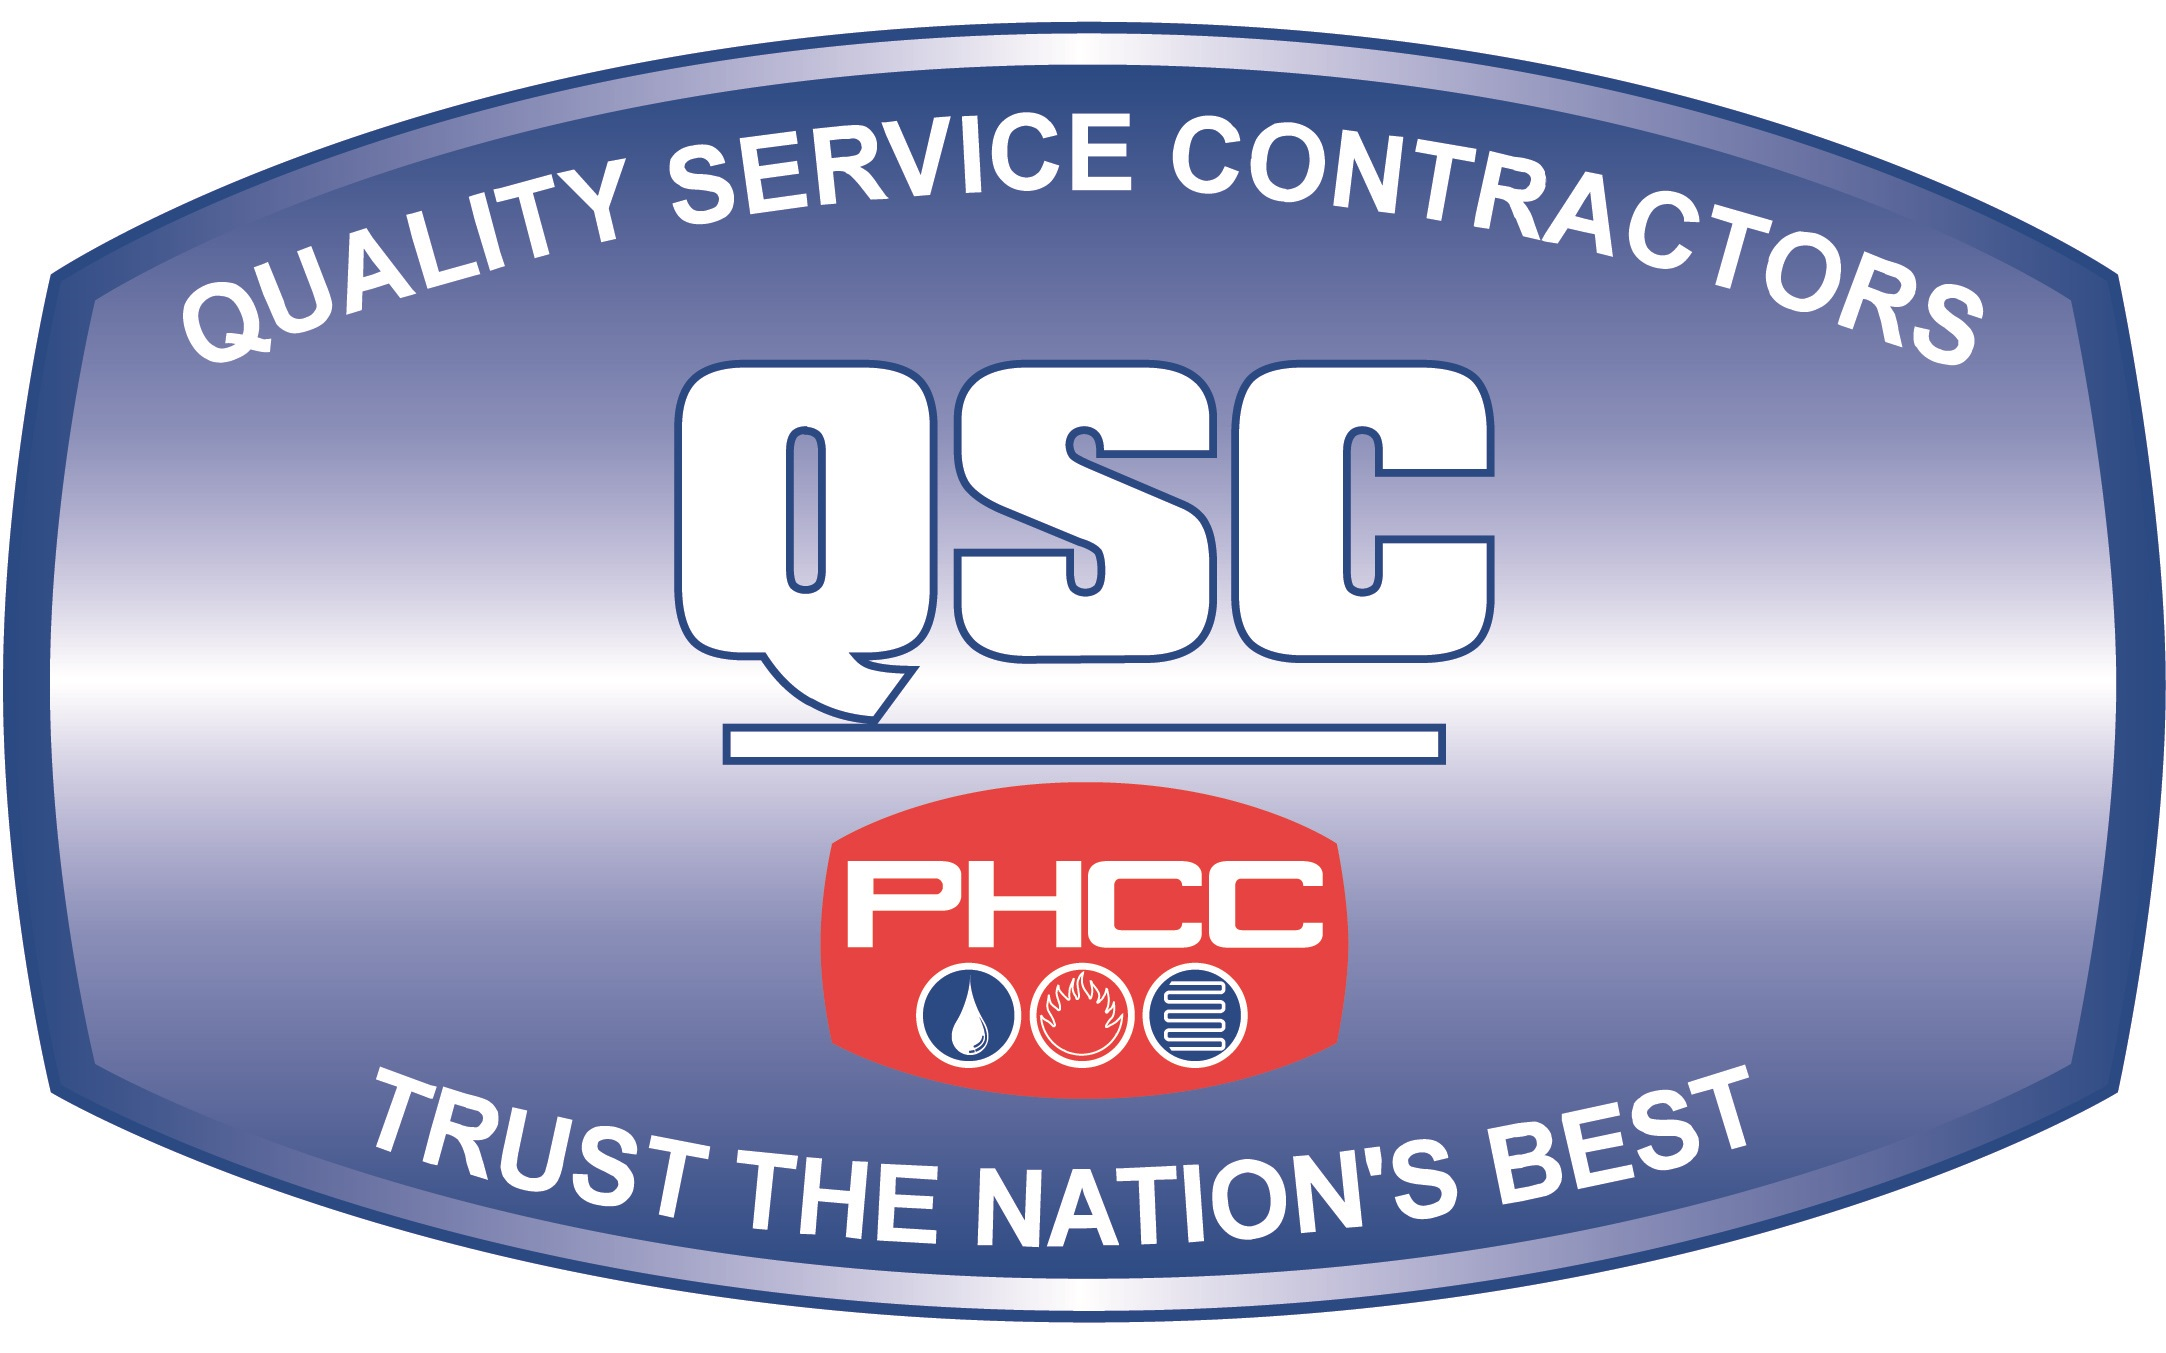 Overcome Sales Objections – And Learn from Them! Service Technician Training Series